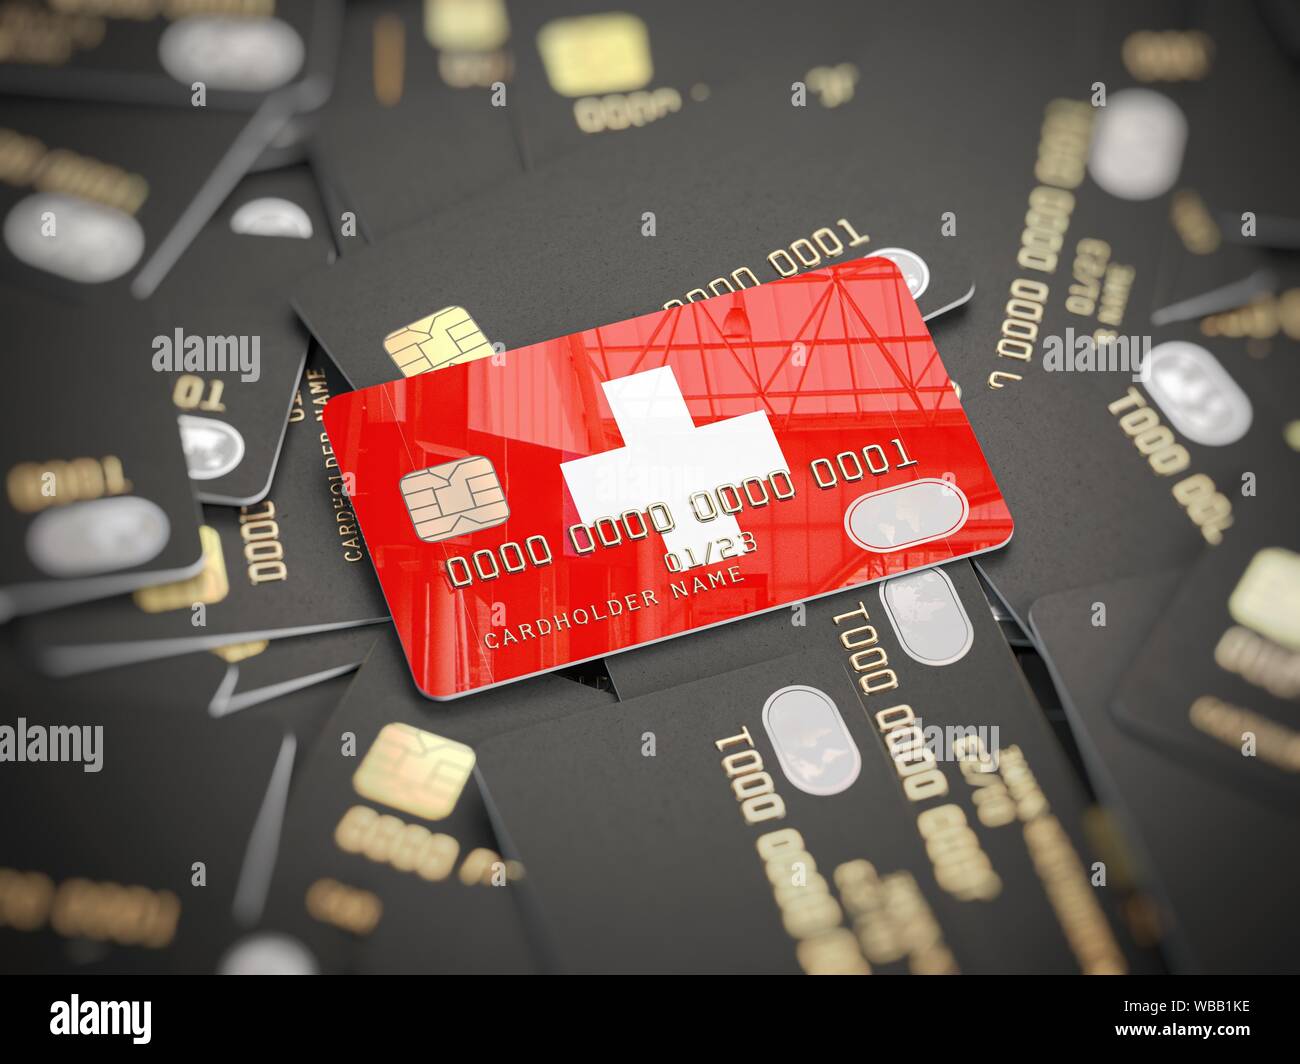 Credit Card Of Swiss Bank On The Heap Of Other Different Black Cards Opening A Bank Account In Switzerland 3d Illustration Stock Photo Alamy